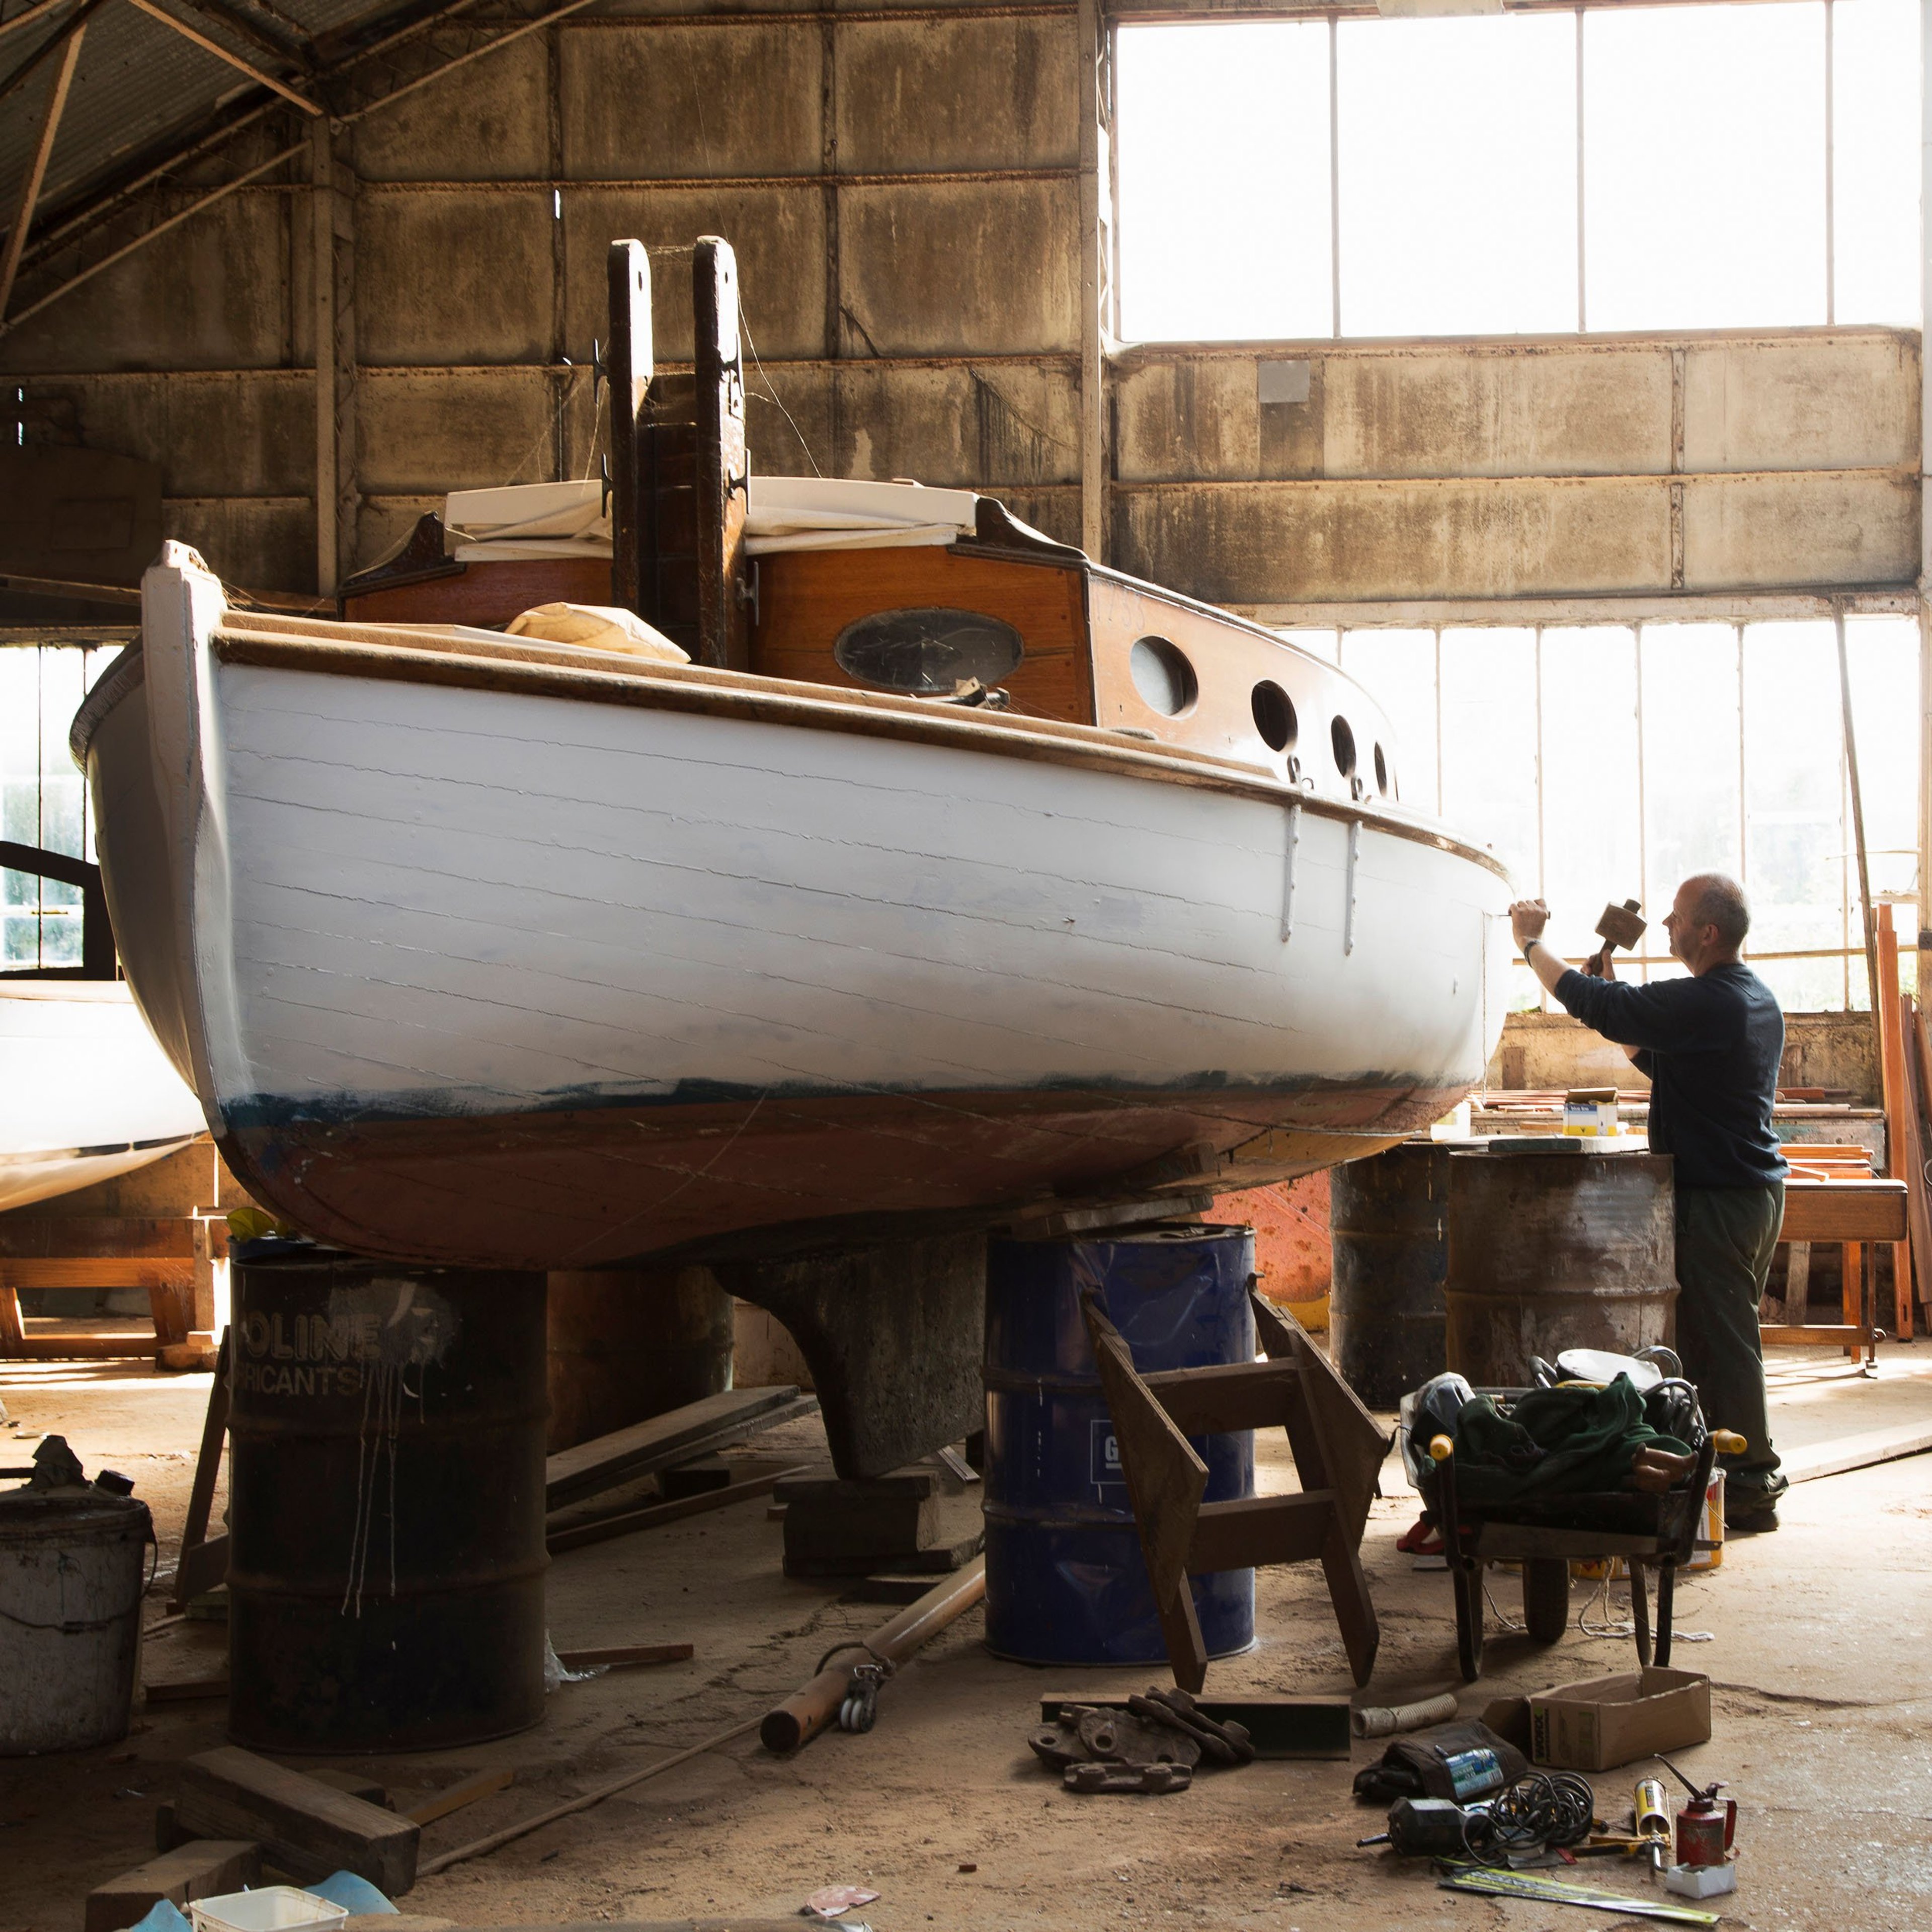 Skilled craftsman reconditioning old sailing boats in boat yard near Norfolk Broads UK.